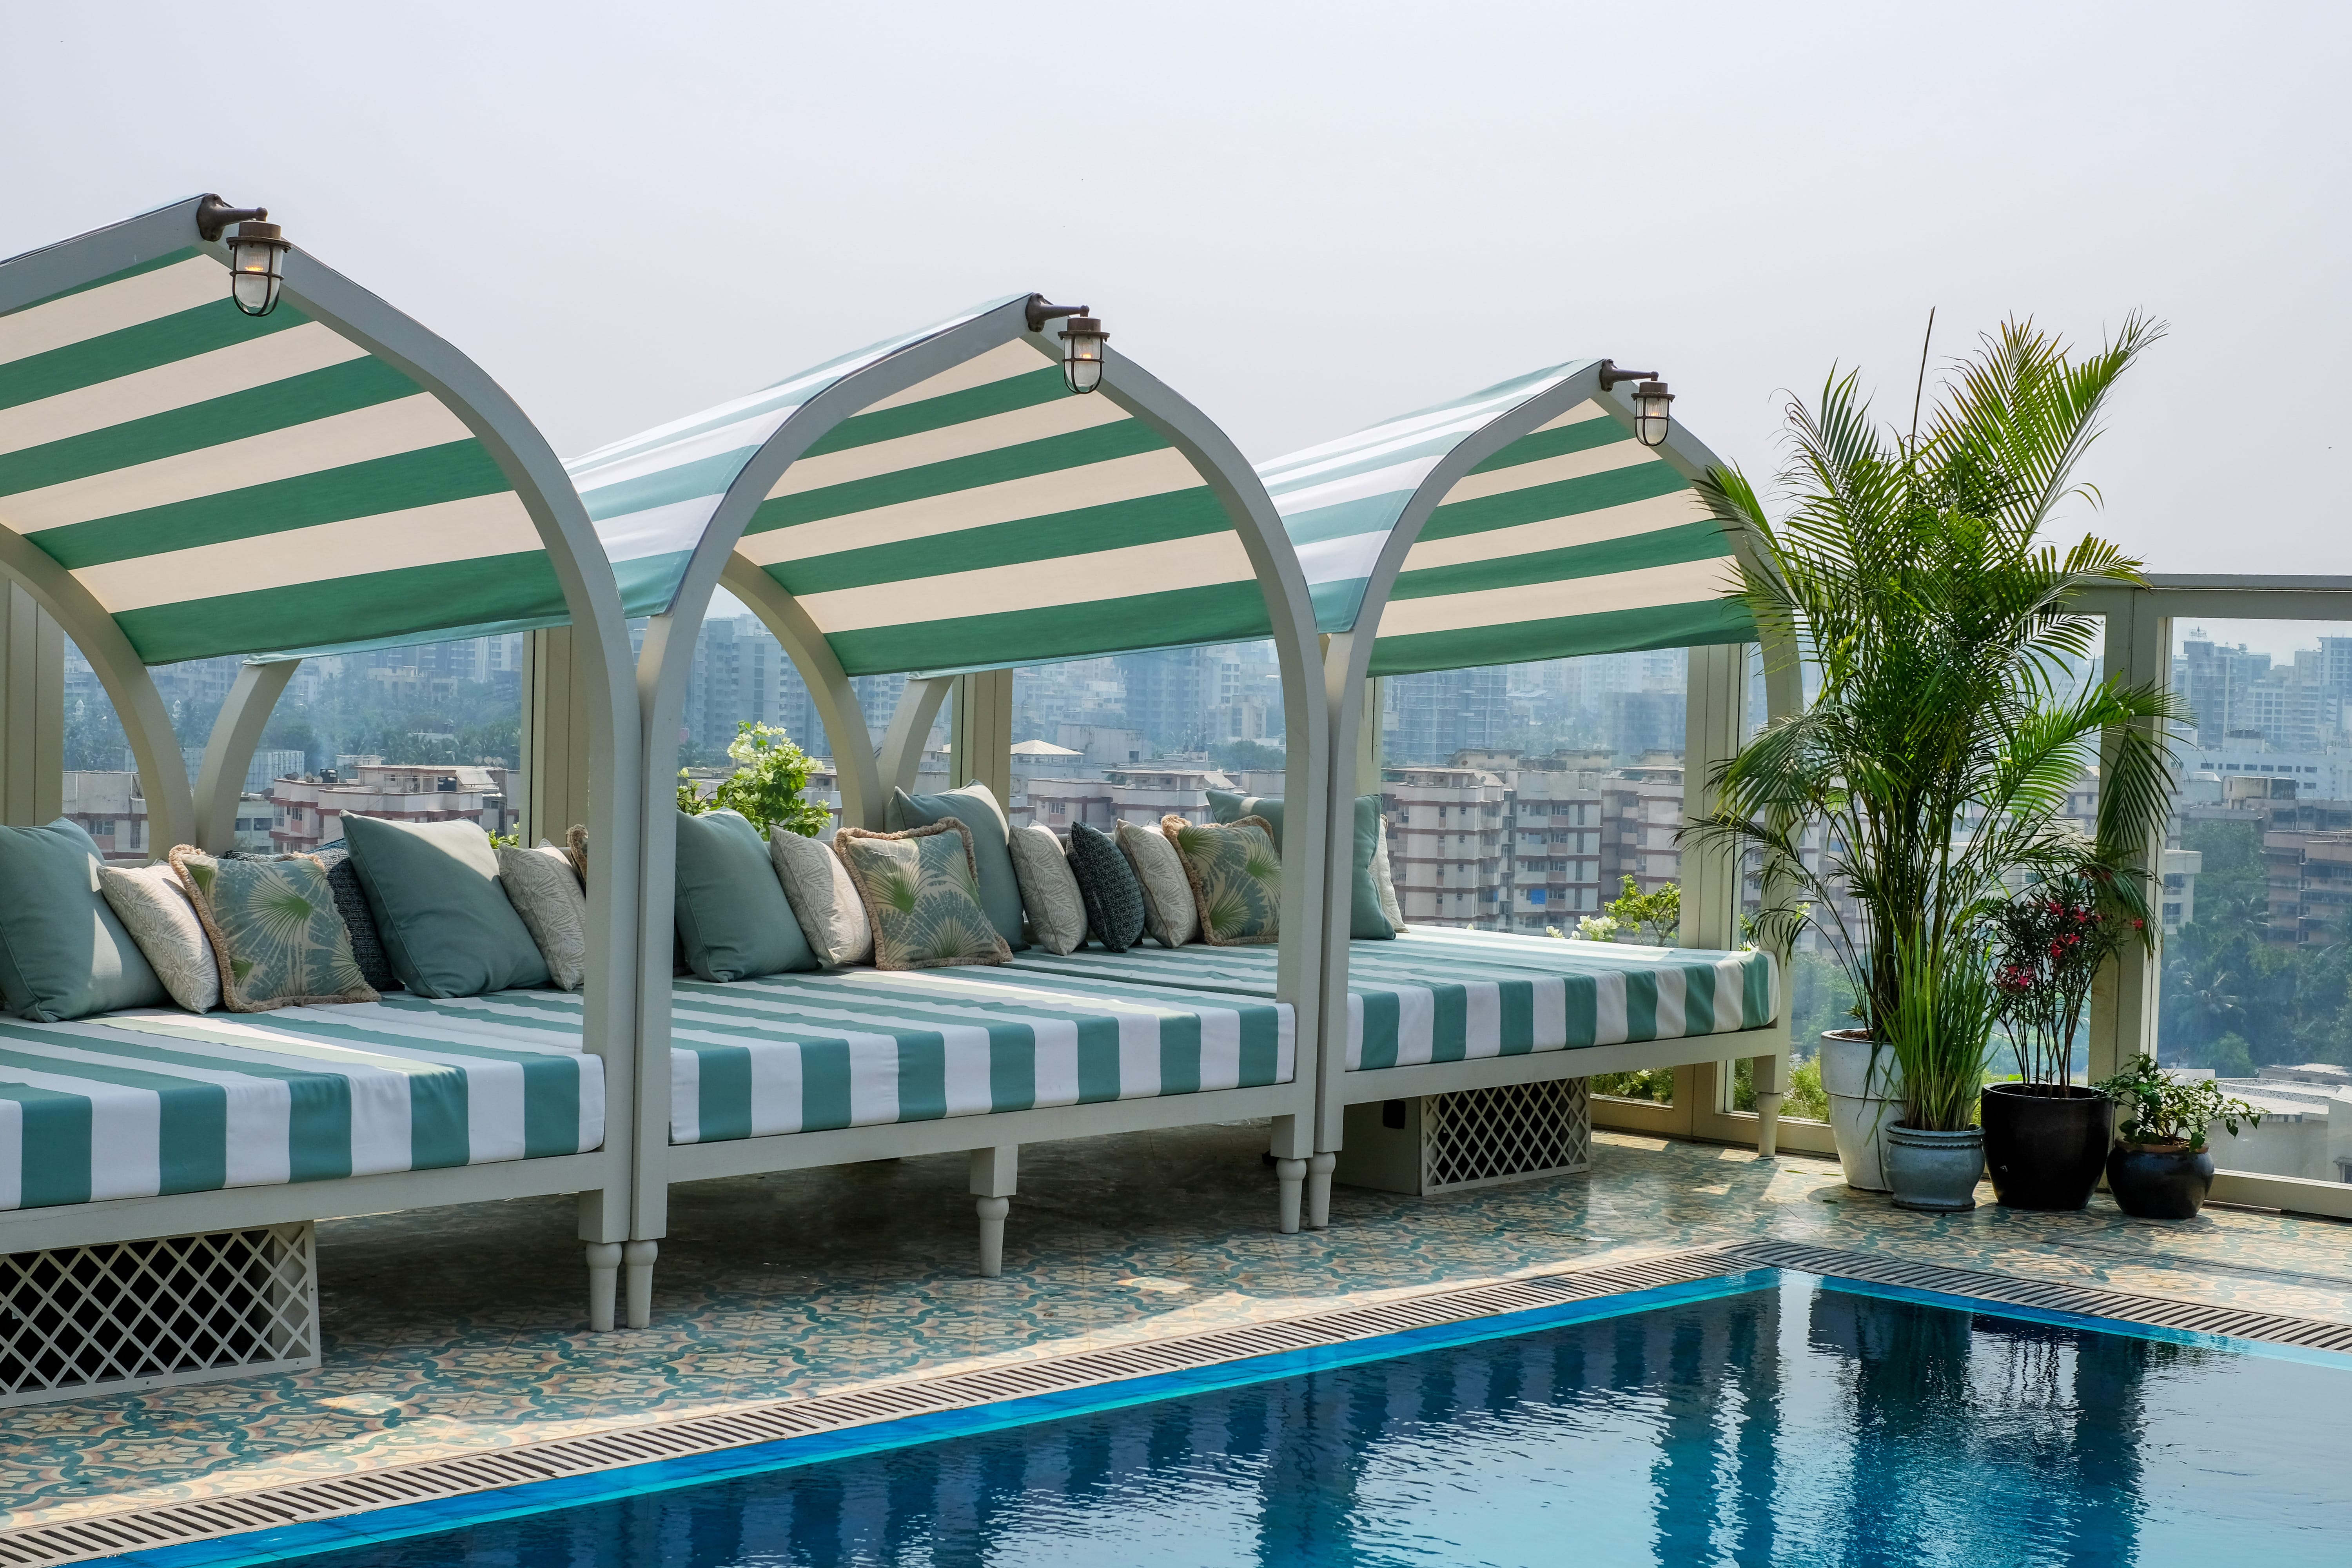 A sneak peek at the cool, new, members-only club in town: Soho House Mumbai